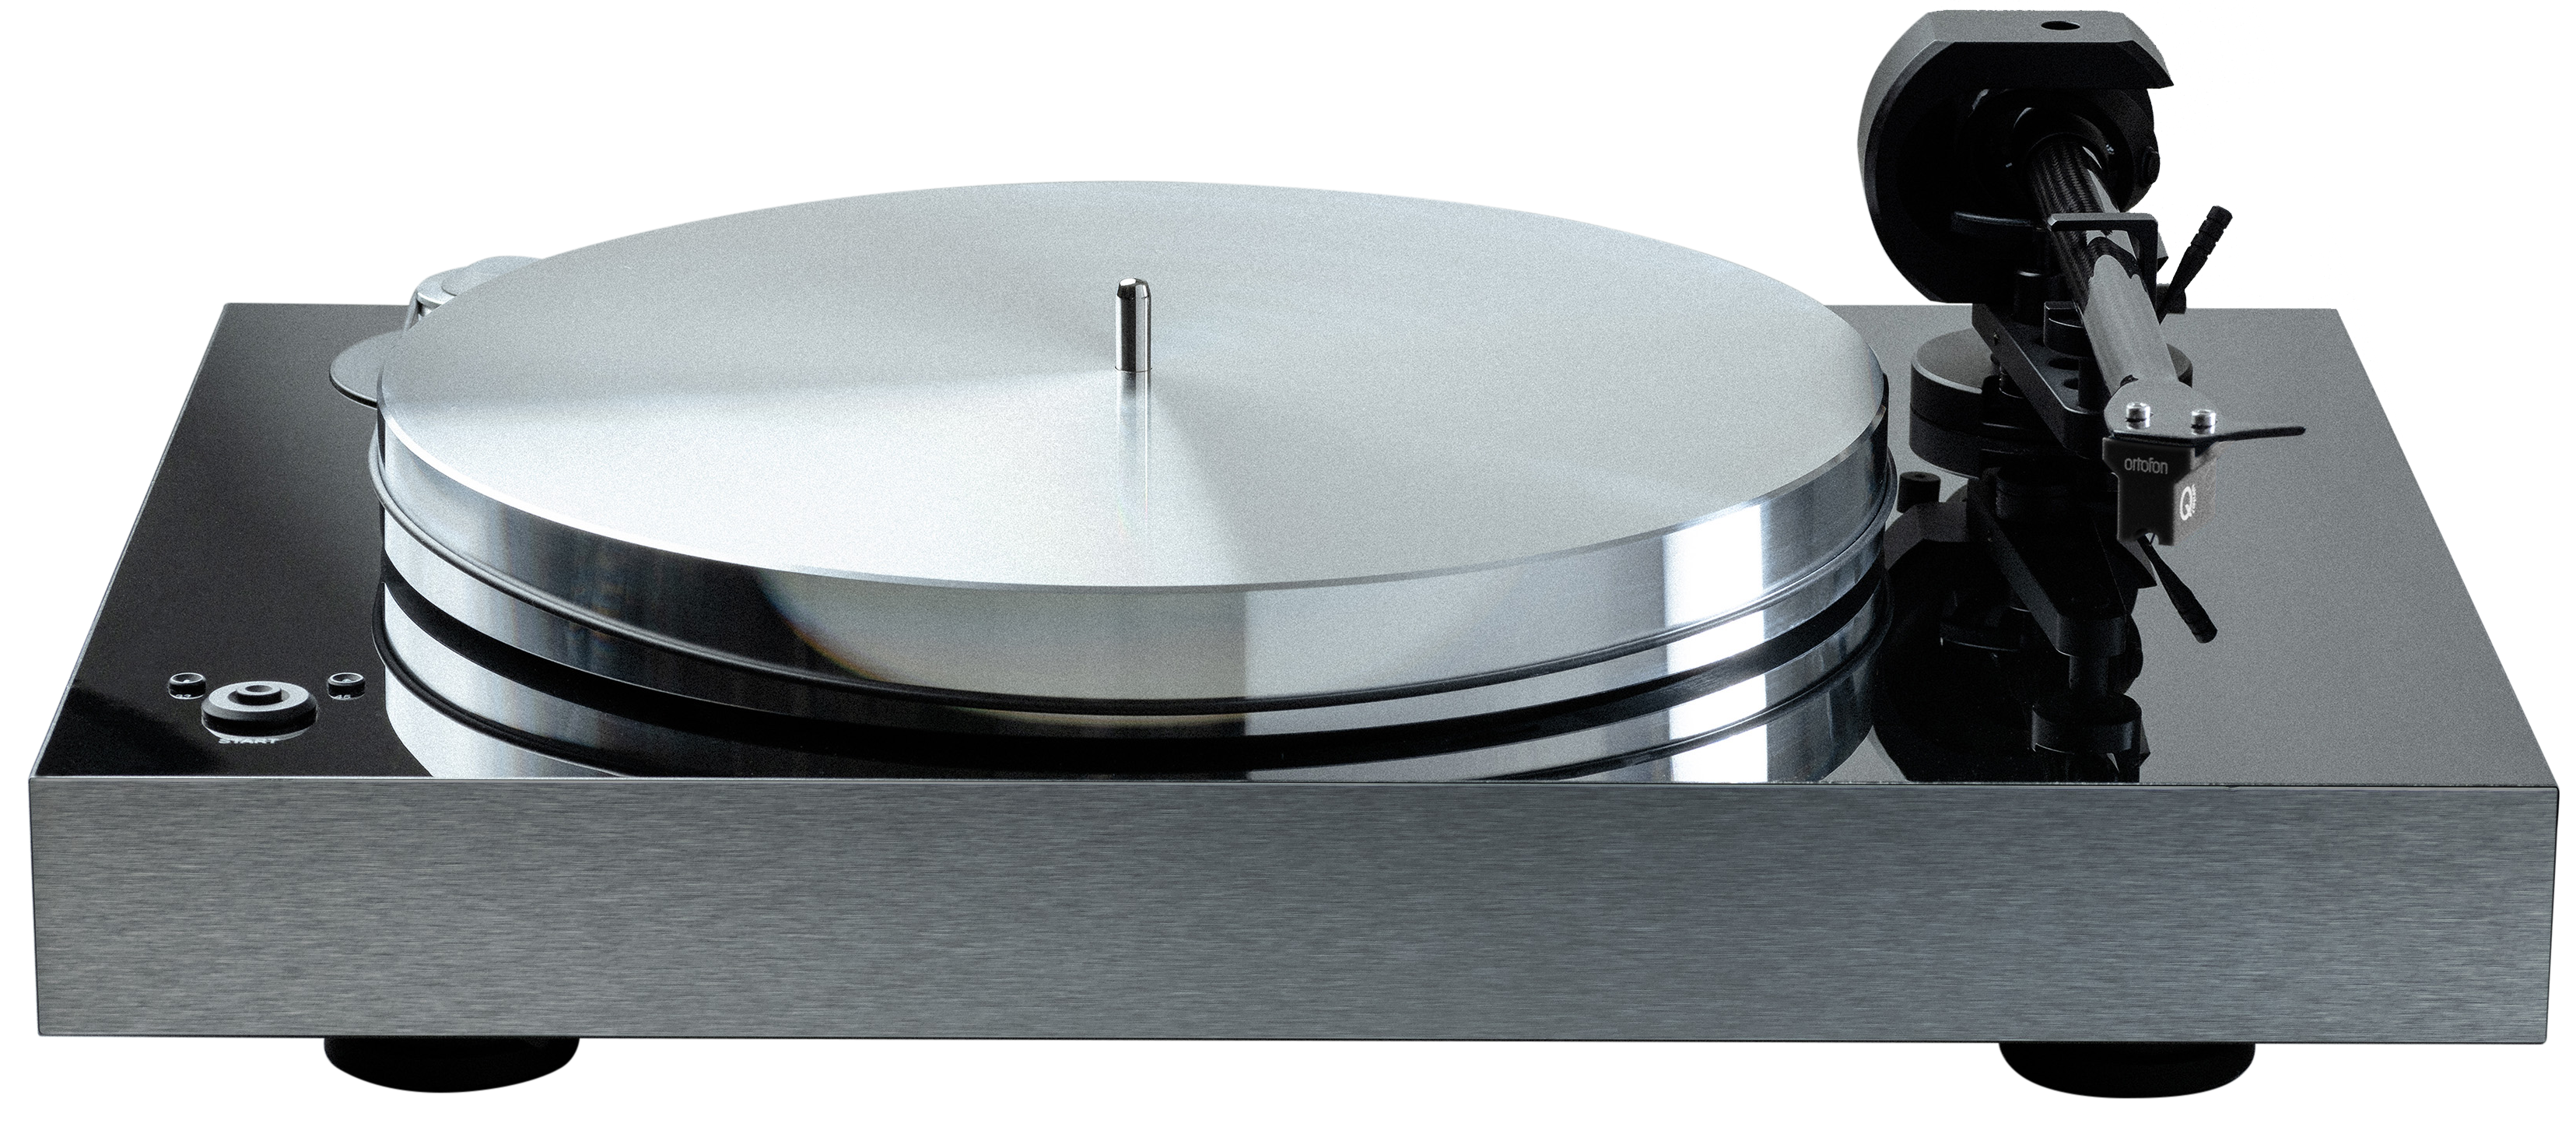 Pro-Ject X8 Evolution Superpack Metallic turntable